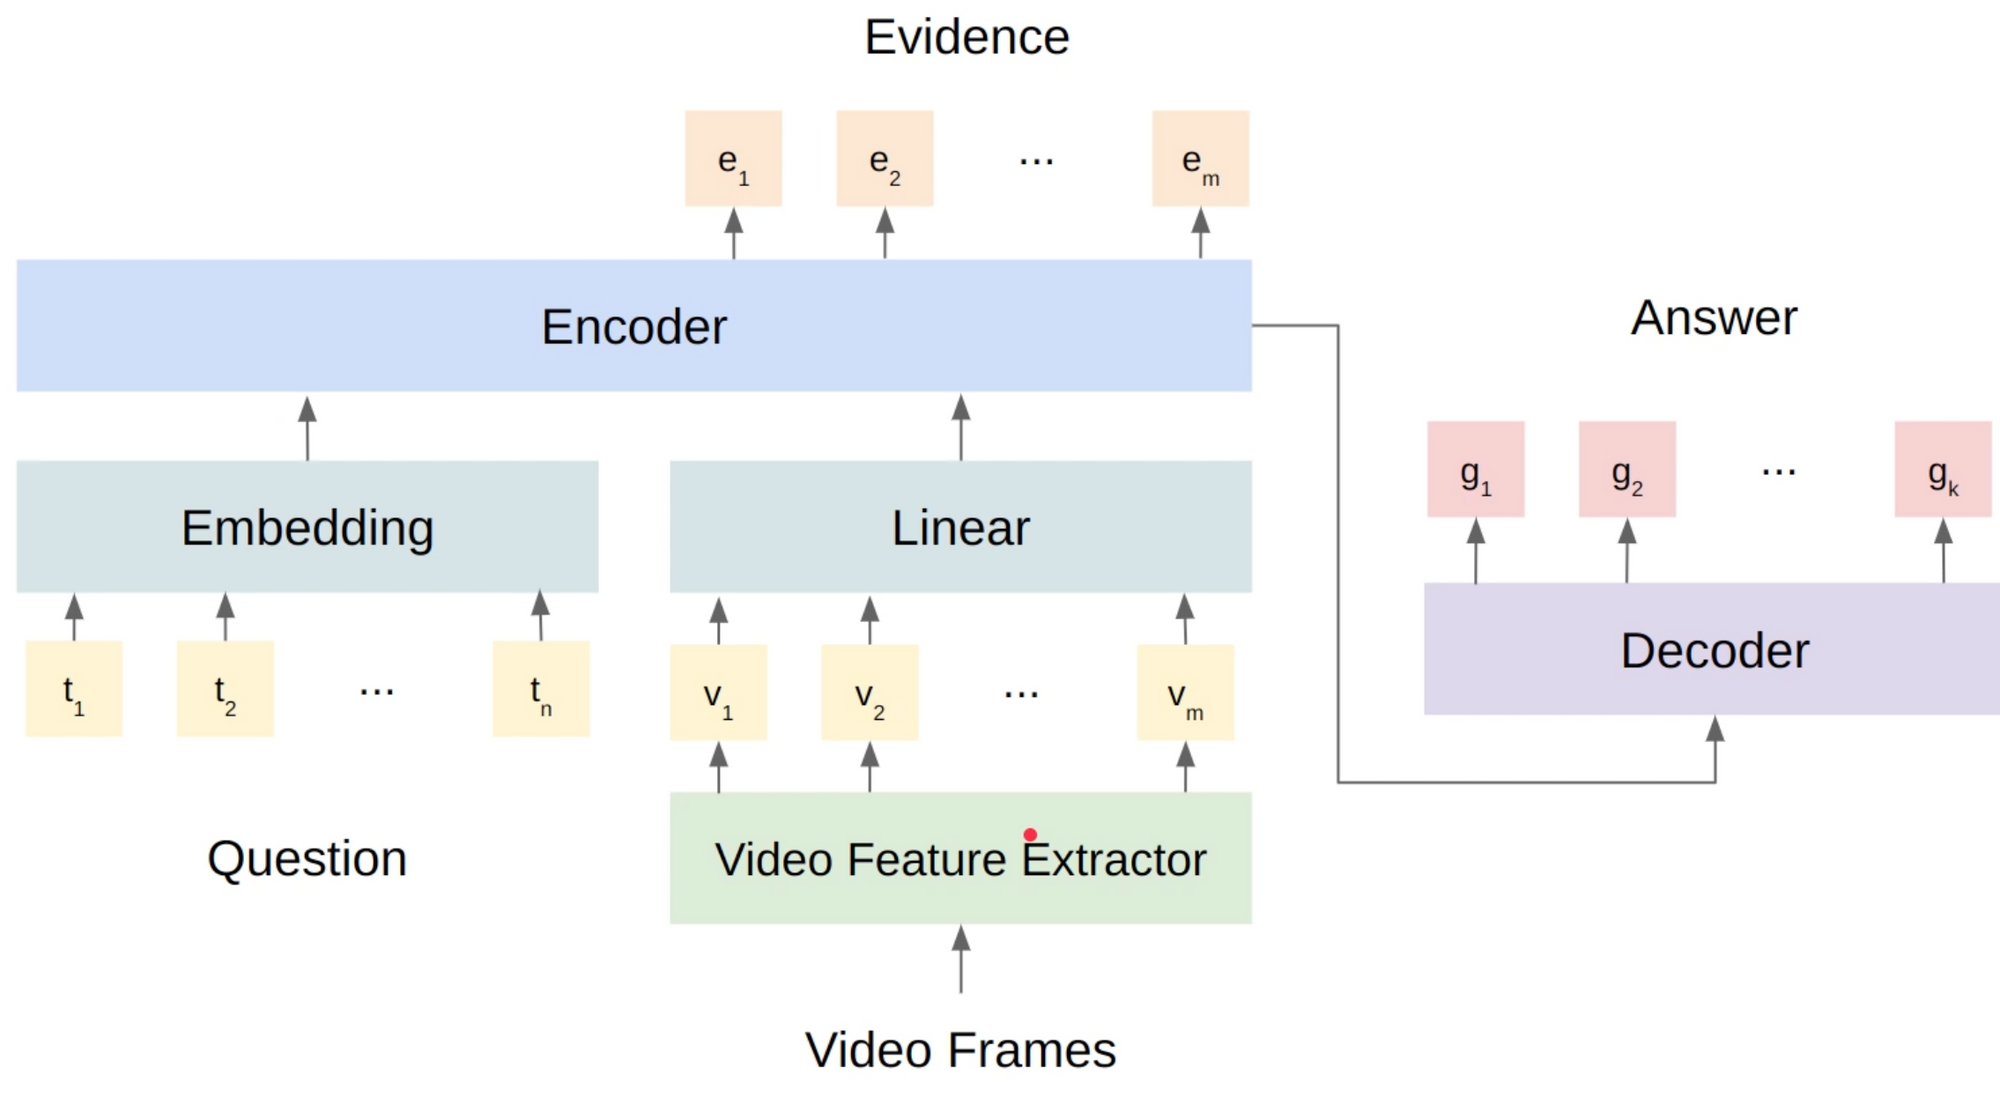 Diagram of a deep reinforcement learning model for video game question-answering featuring extractors, encoders, and decoders